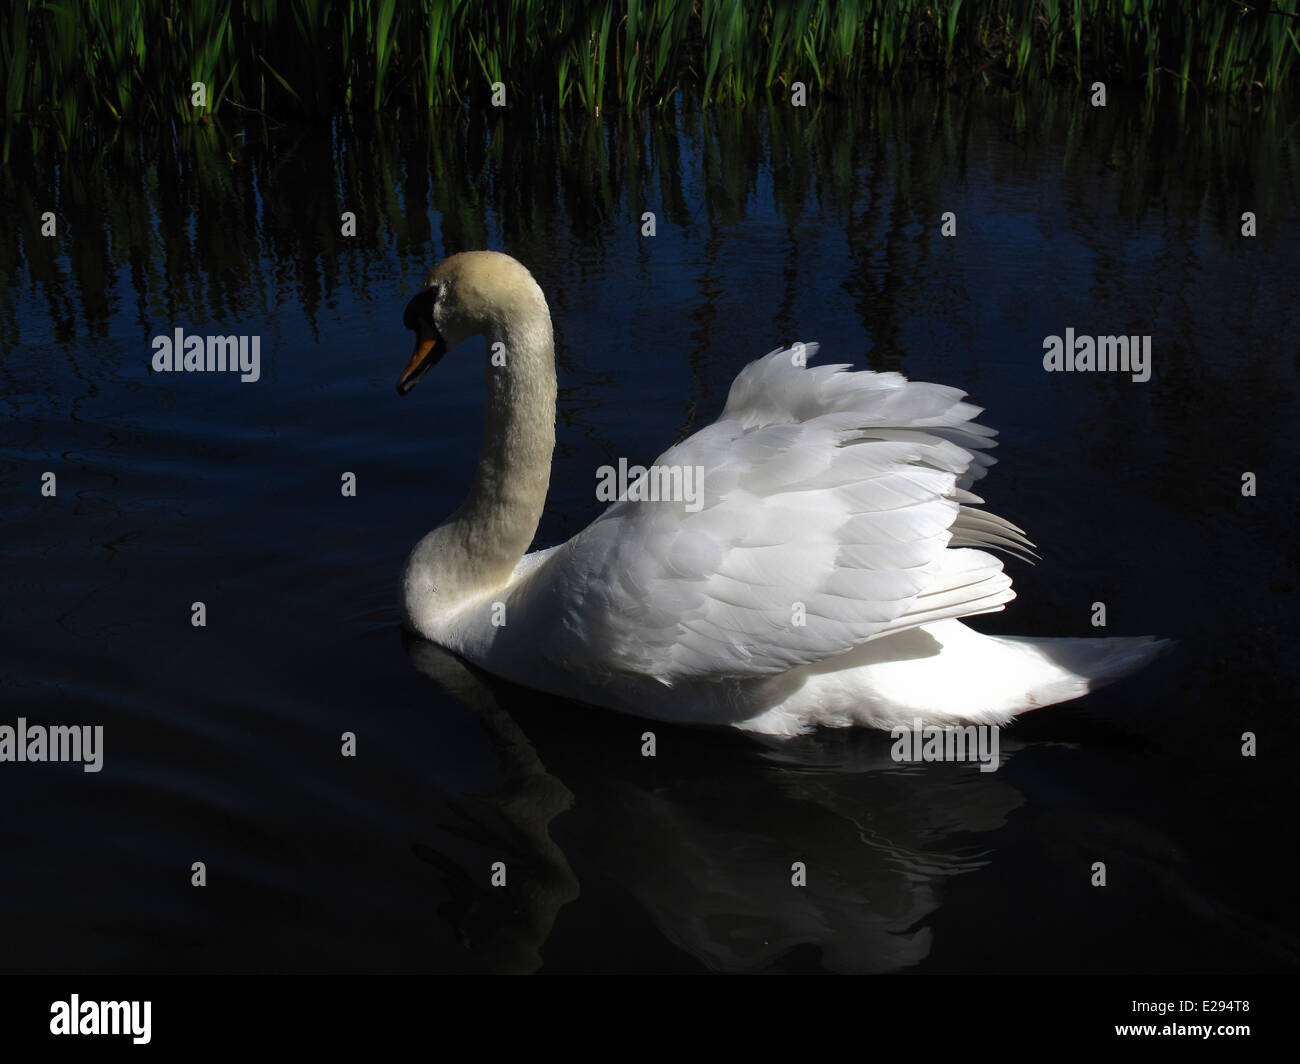 White swan in high contrast Stock Photo